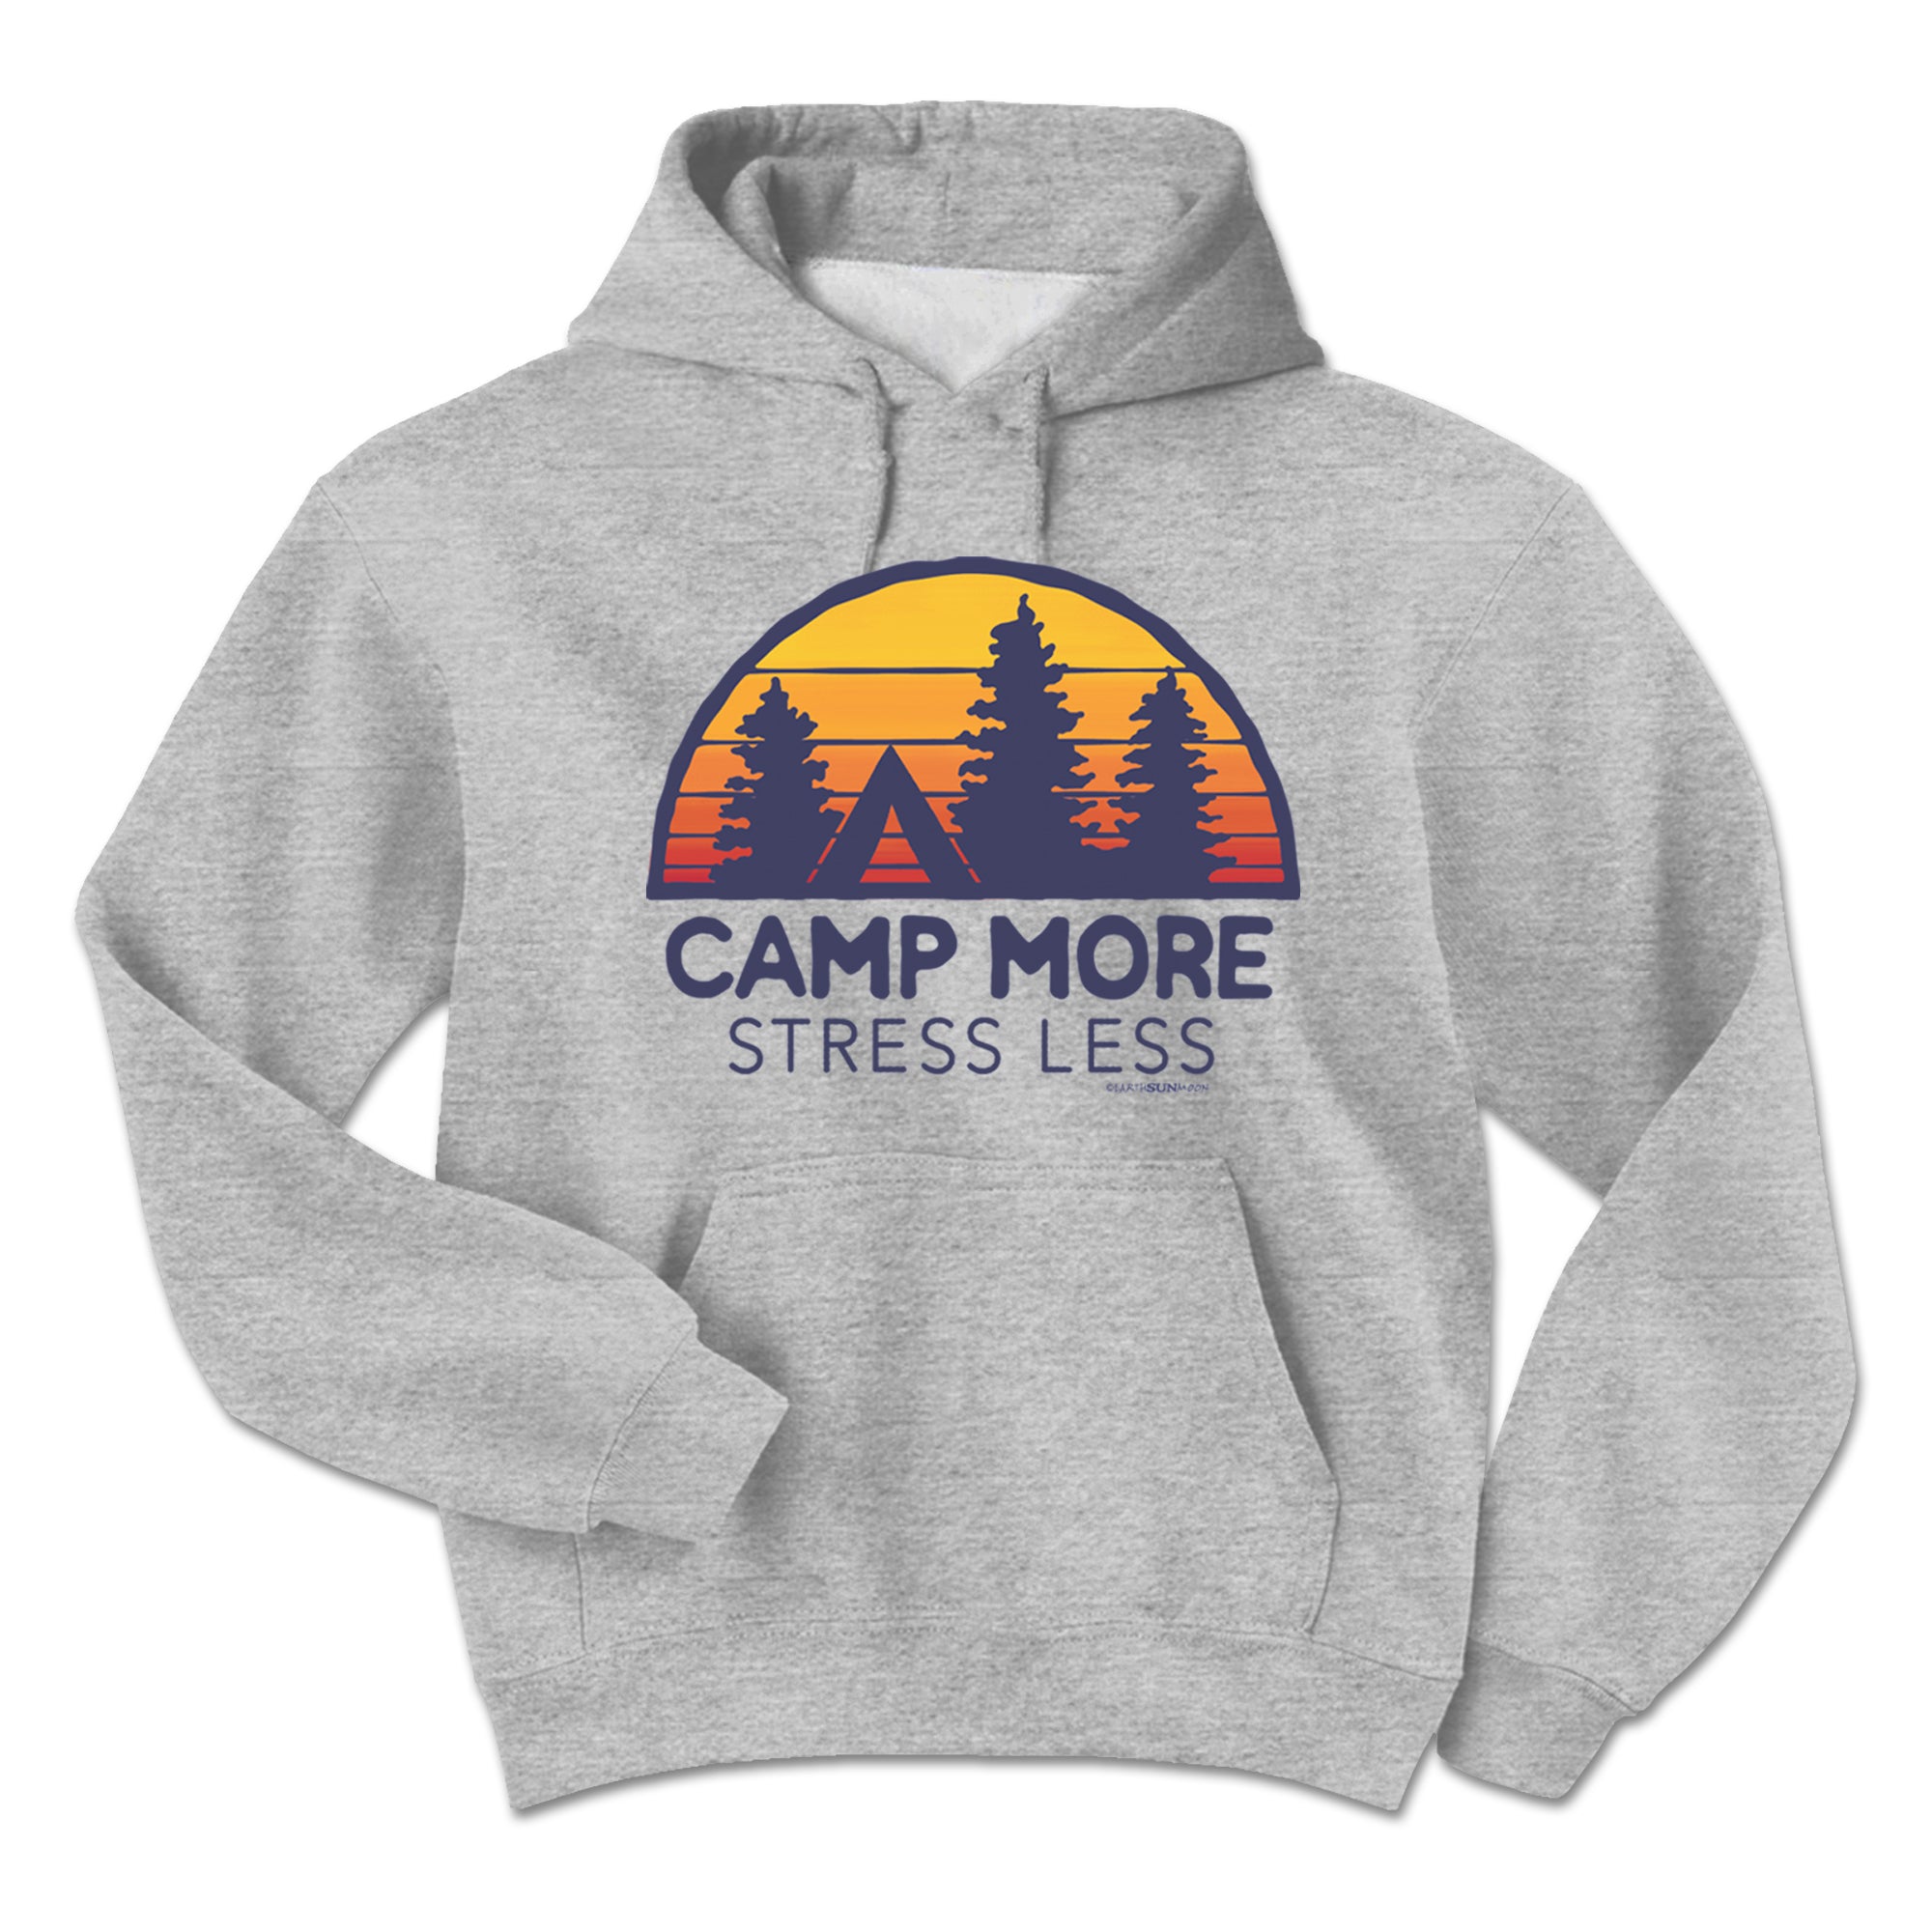 Earth Sun Moon Camp More Stress Less Adult Hoodie - Sports Grey - L